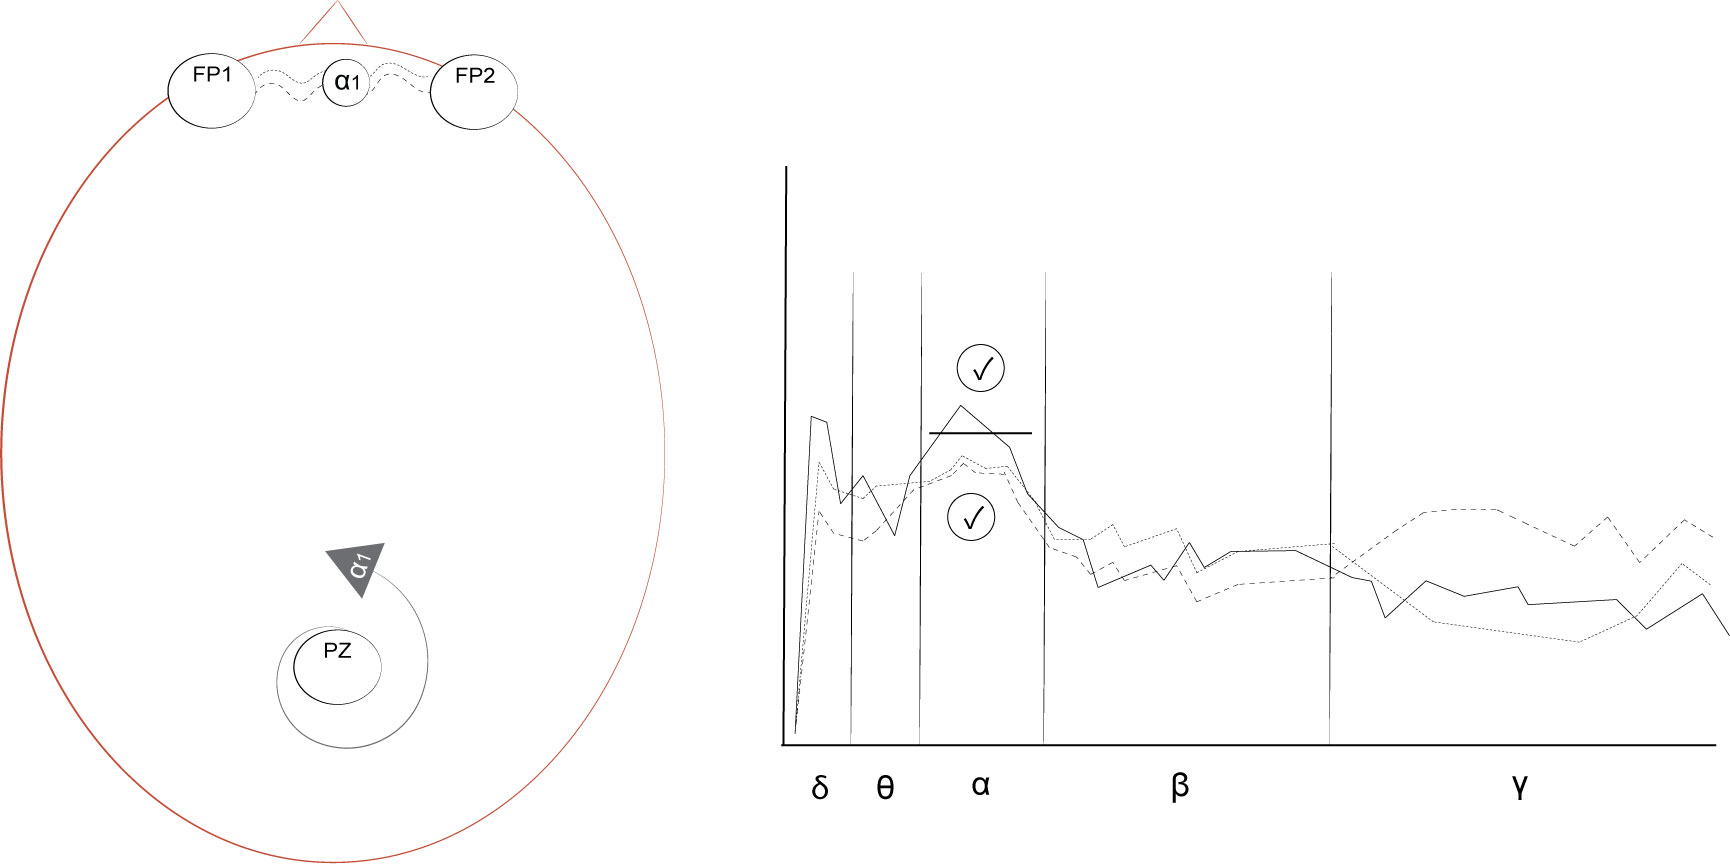 A quiet mind protocol's electrode location (left) and spectral plot (right) show the application of one indicator rewarding increase of low-alpha on PZ and another indicator rewarding low-alpha coherence between FP1 and FP2.